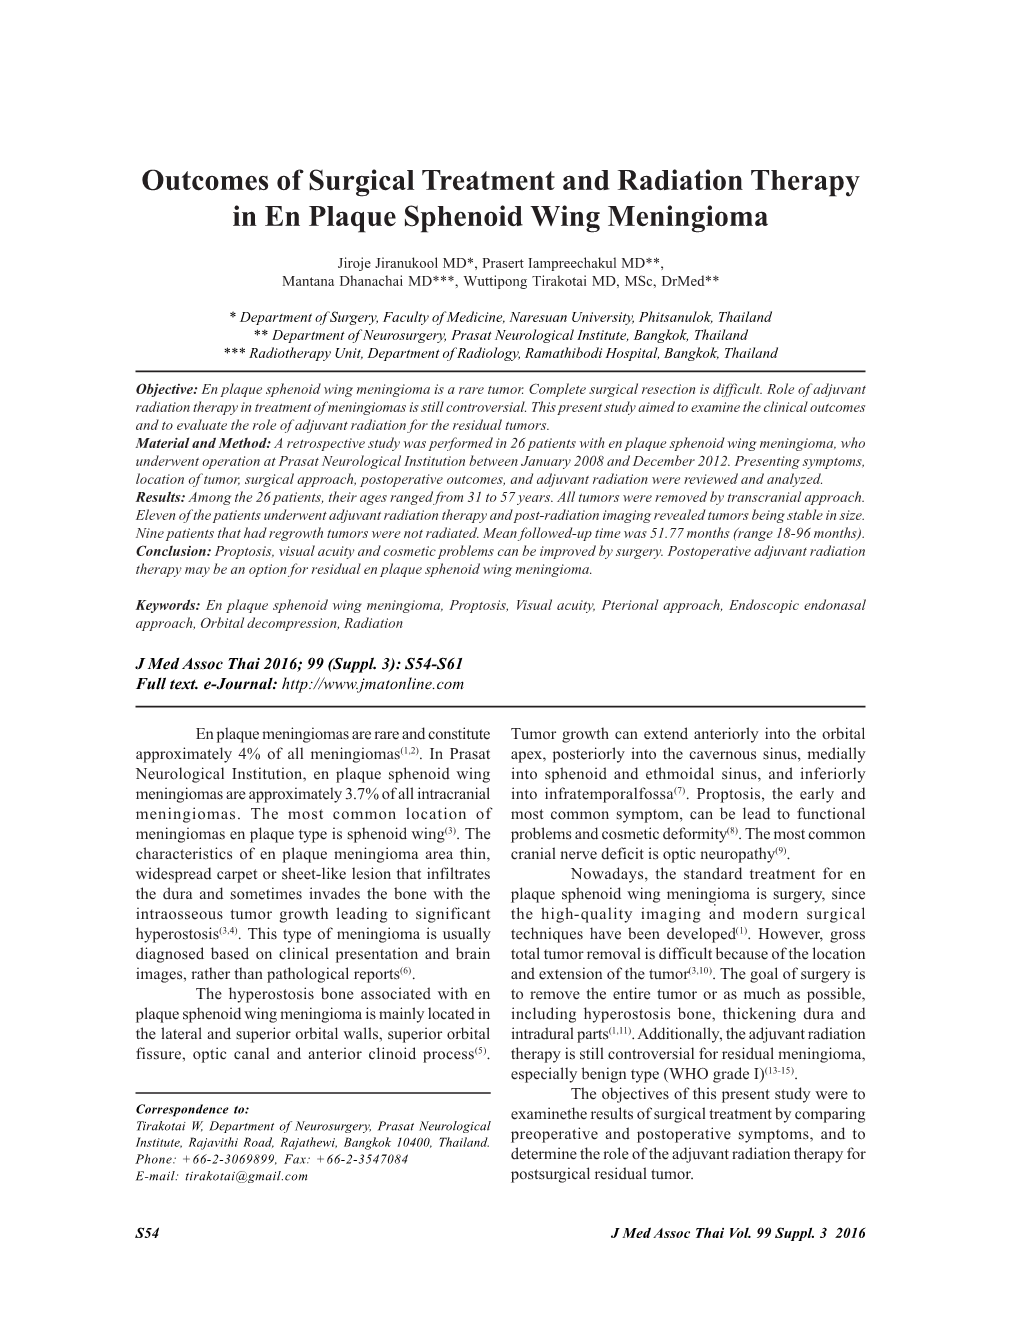 Outcomes of Surgical Treatment and Radiation Therapy in En Plaque Sphenoid Wing Meningioma